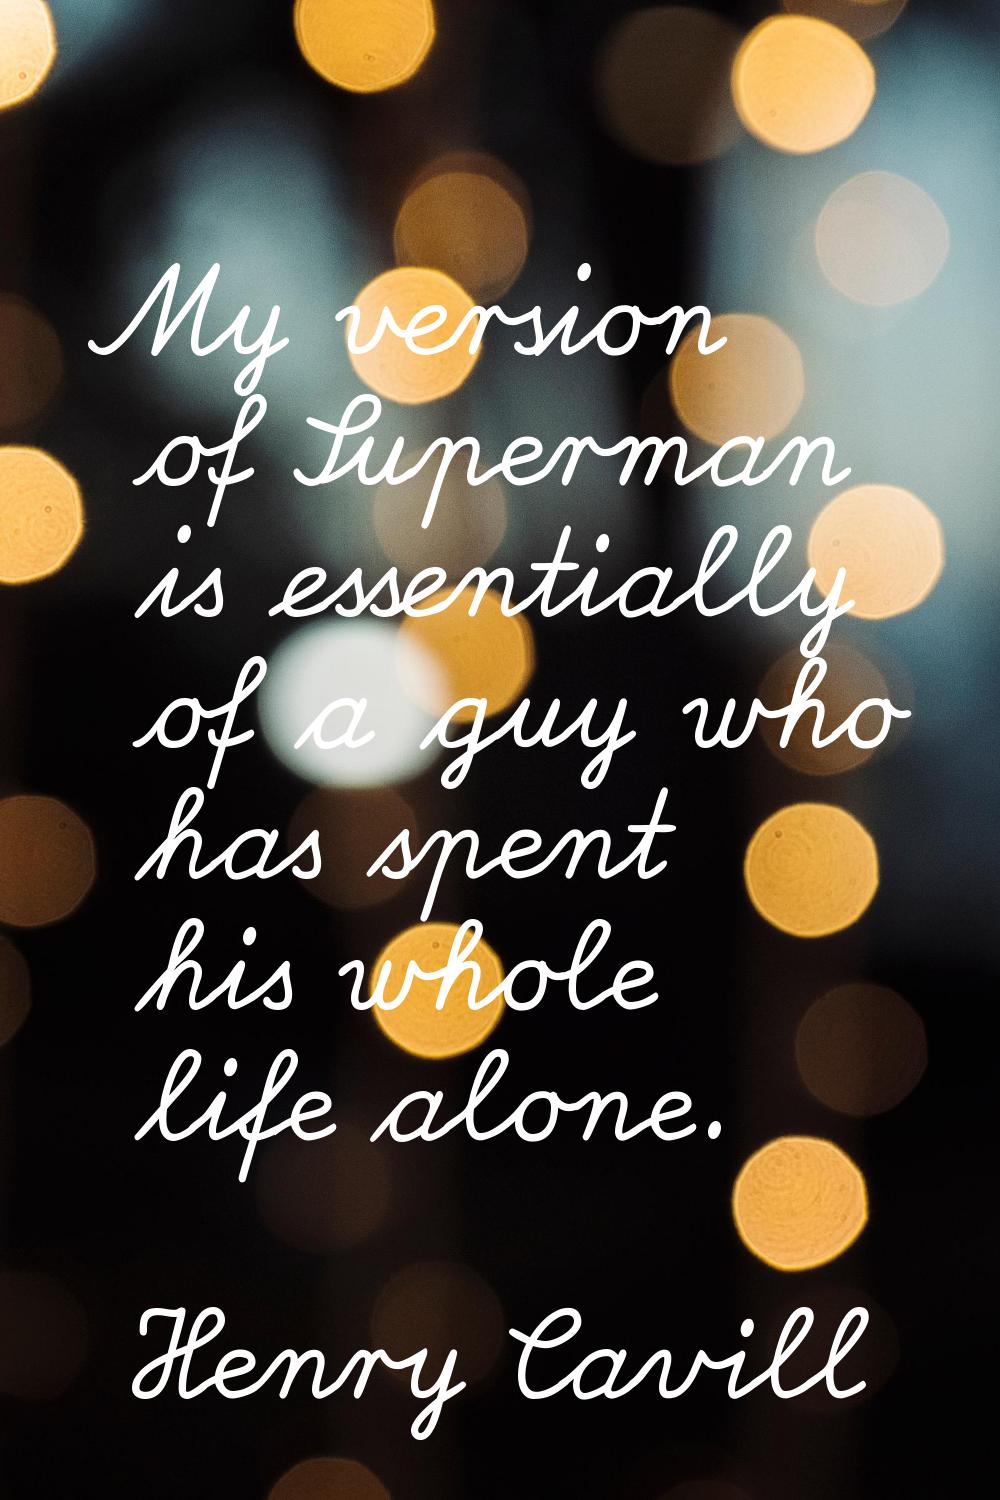 My version of Superman is essentially of a guy who has spent his whole life alone.